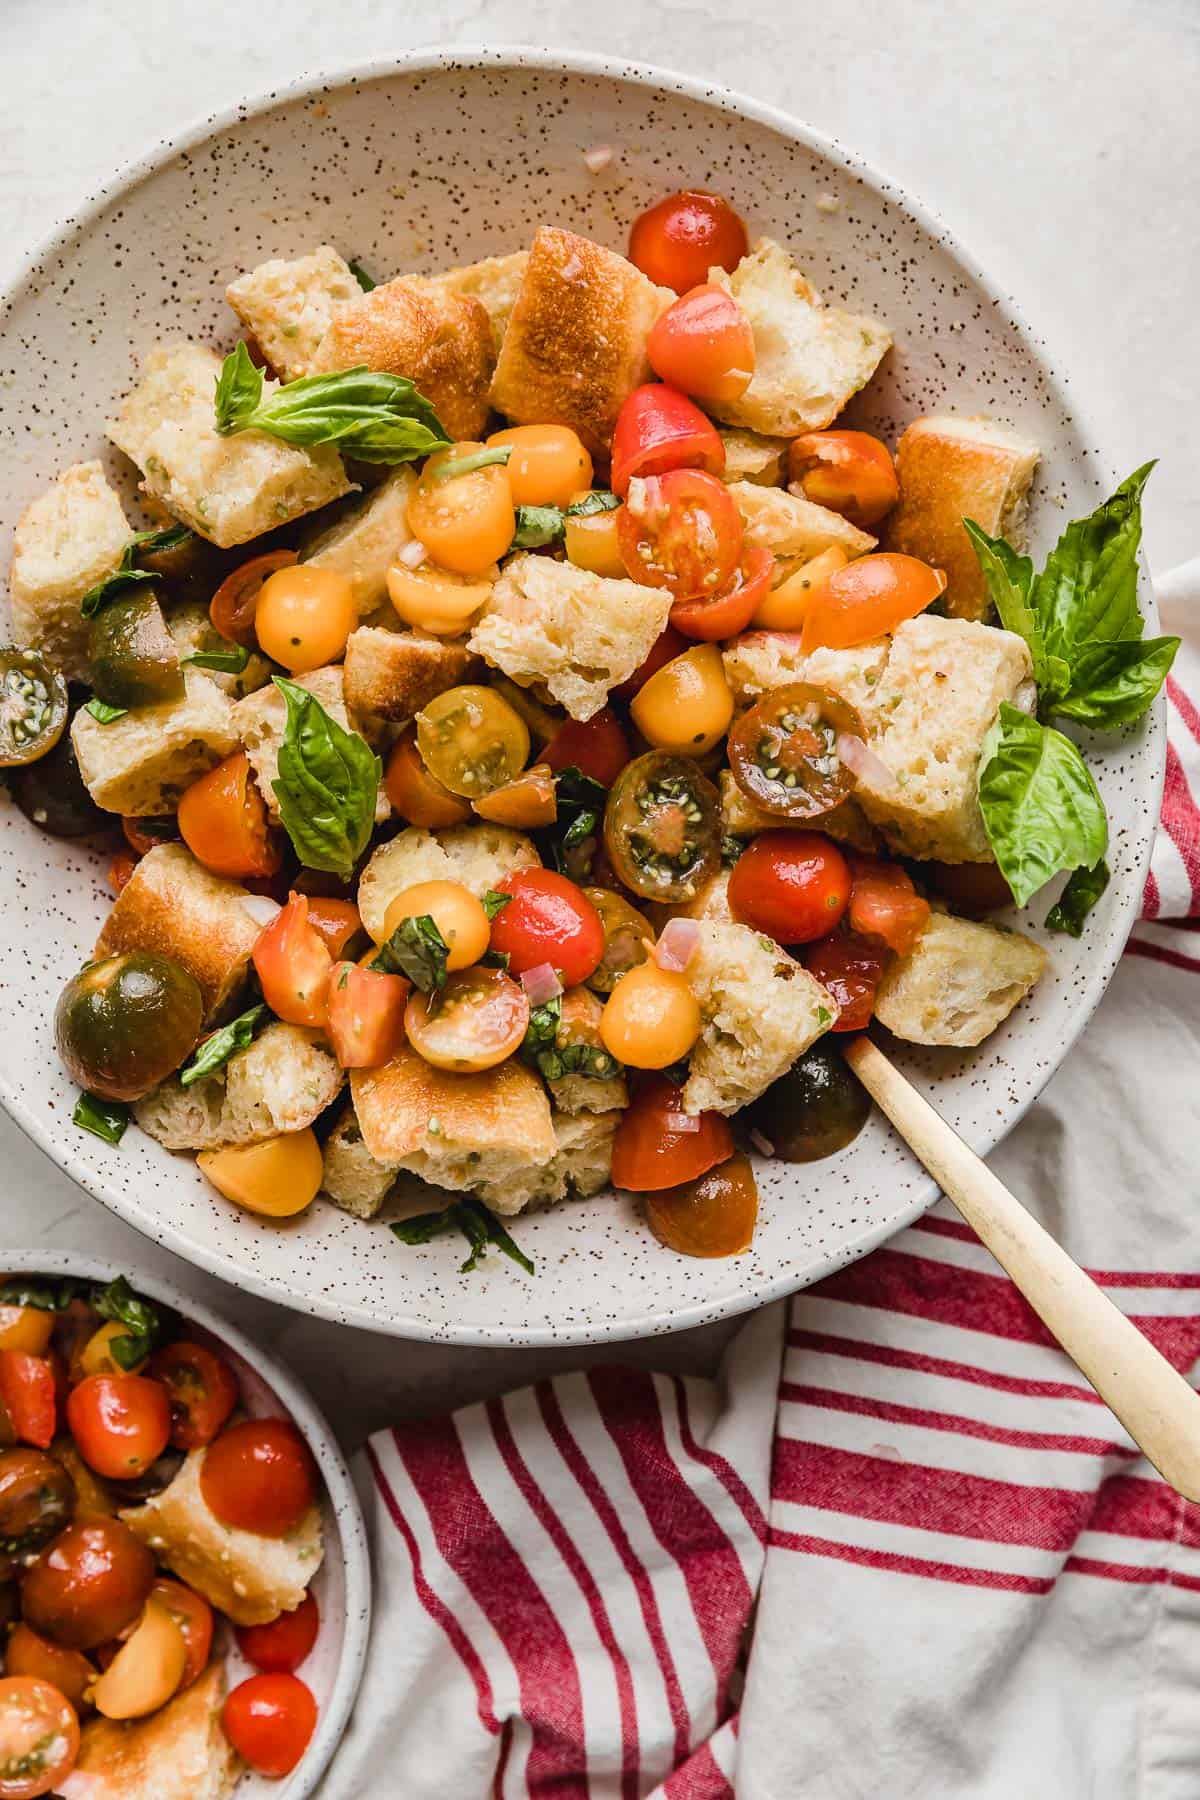 A bowl filled with panmolle or Panzanella Toscana with stale bread, chopped tomatoes, and fresh basil.